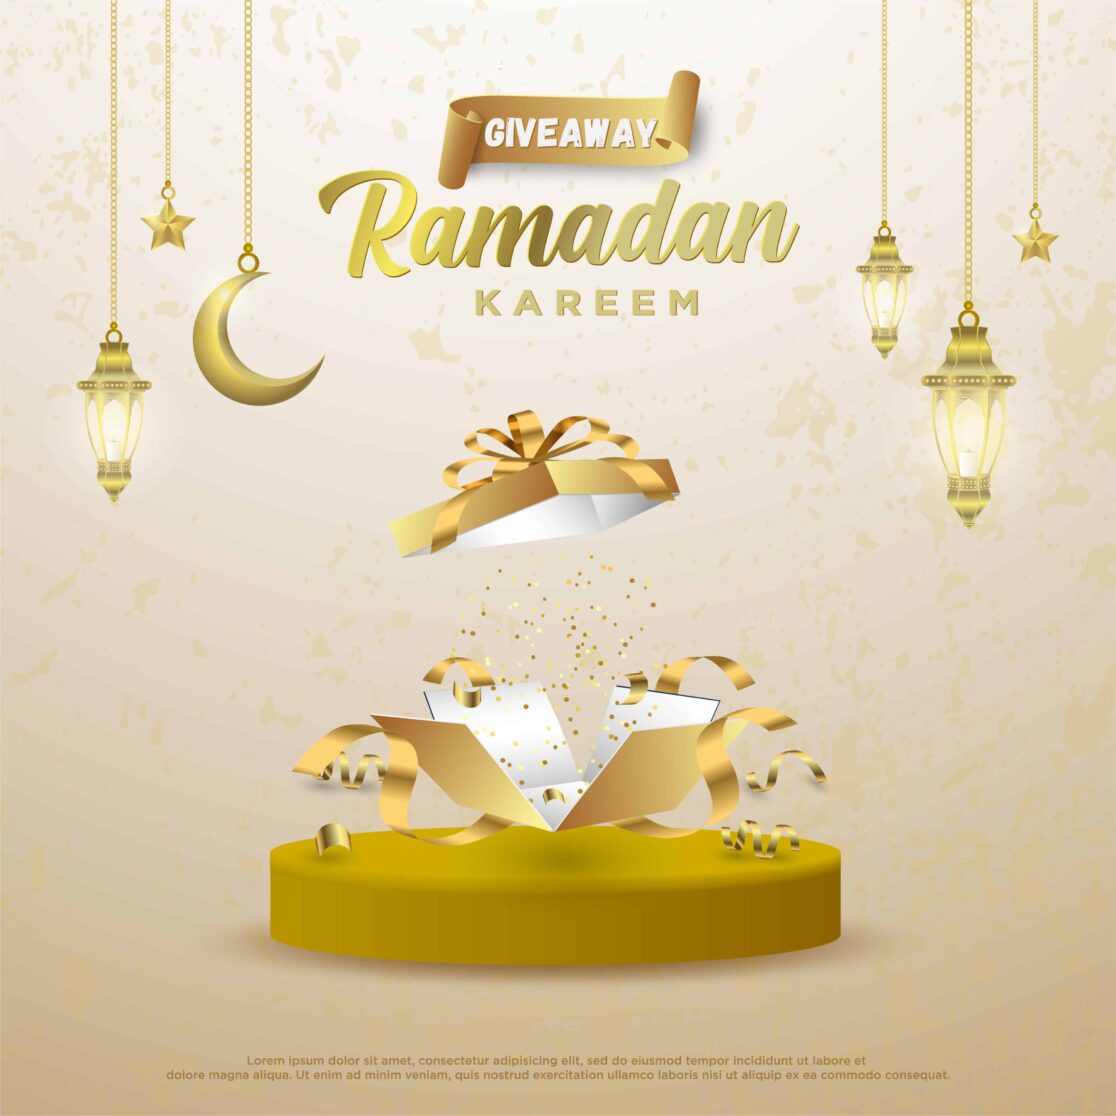 Hosting a Ramadan giveaway on your site